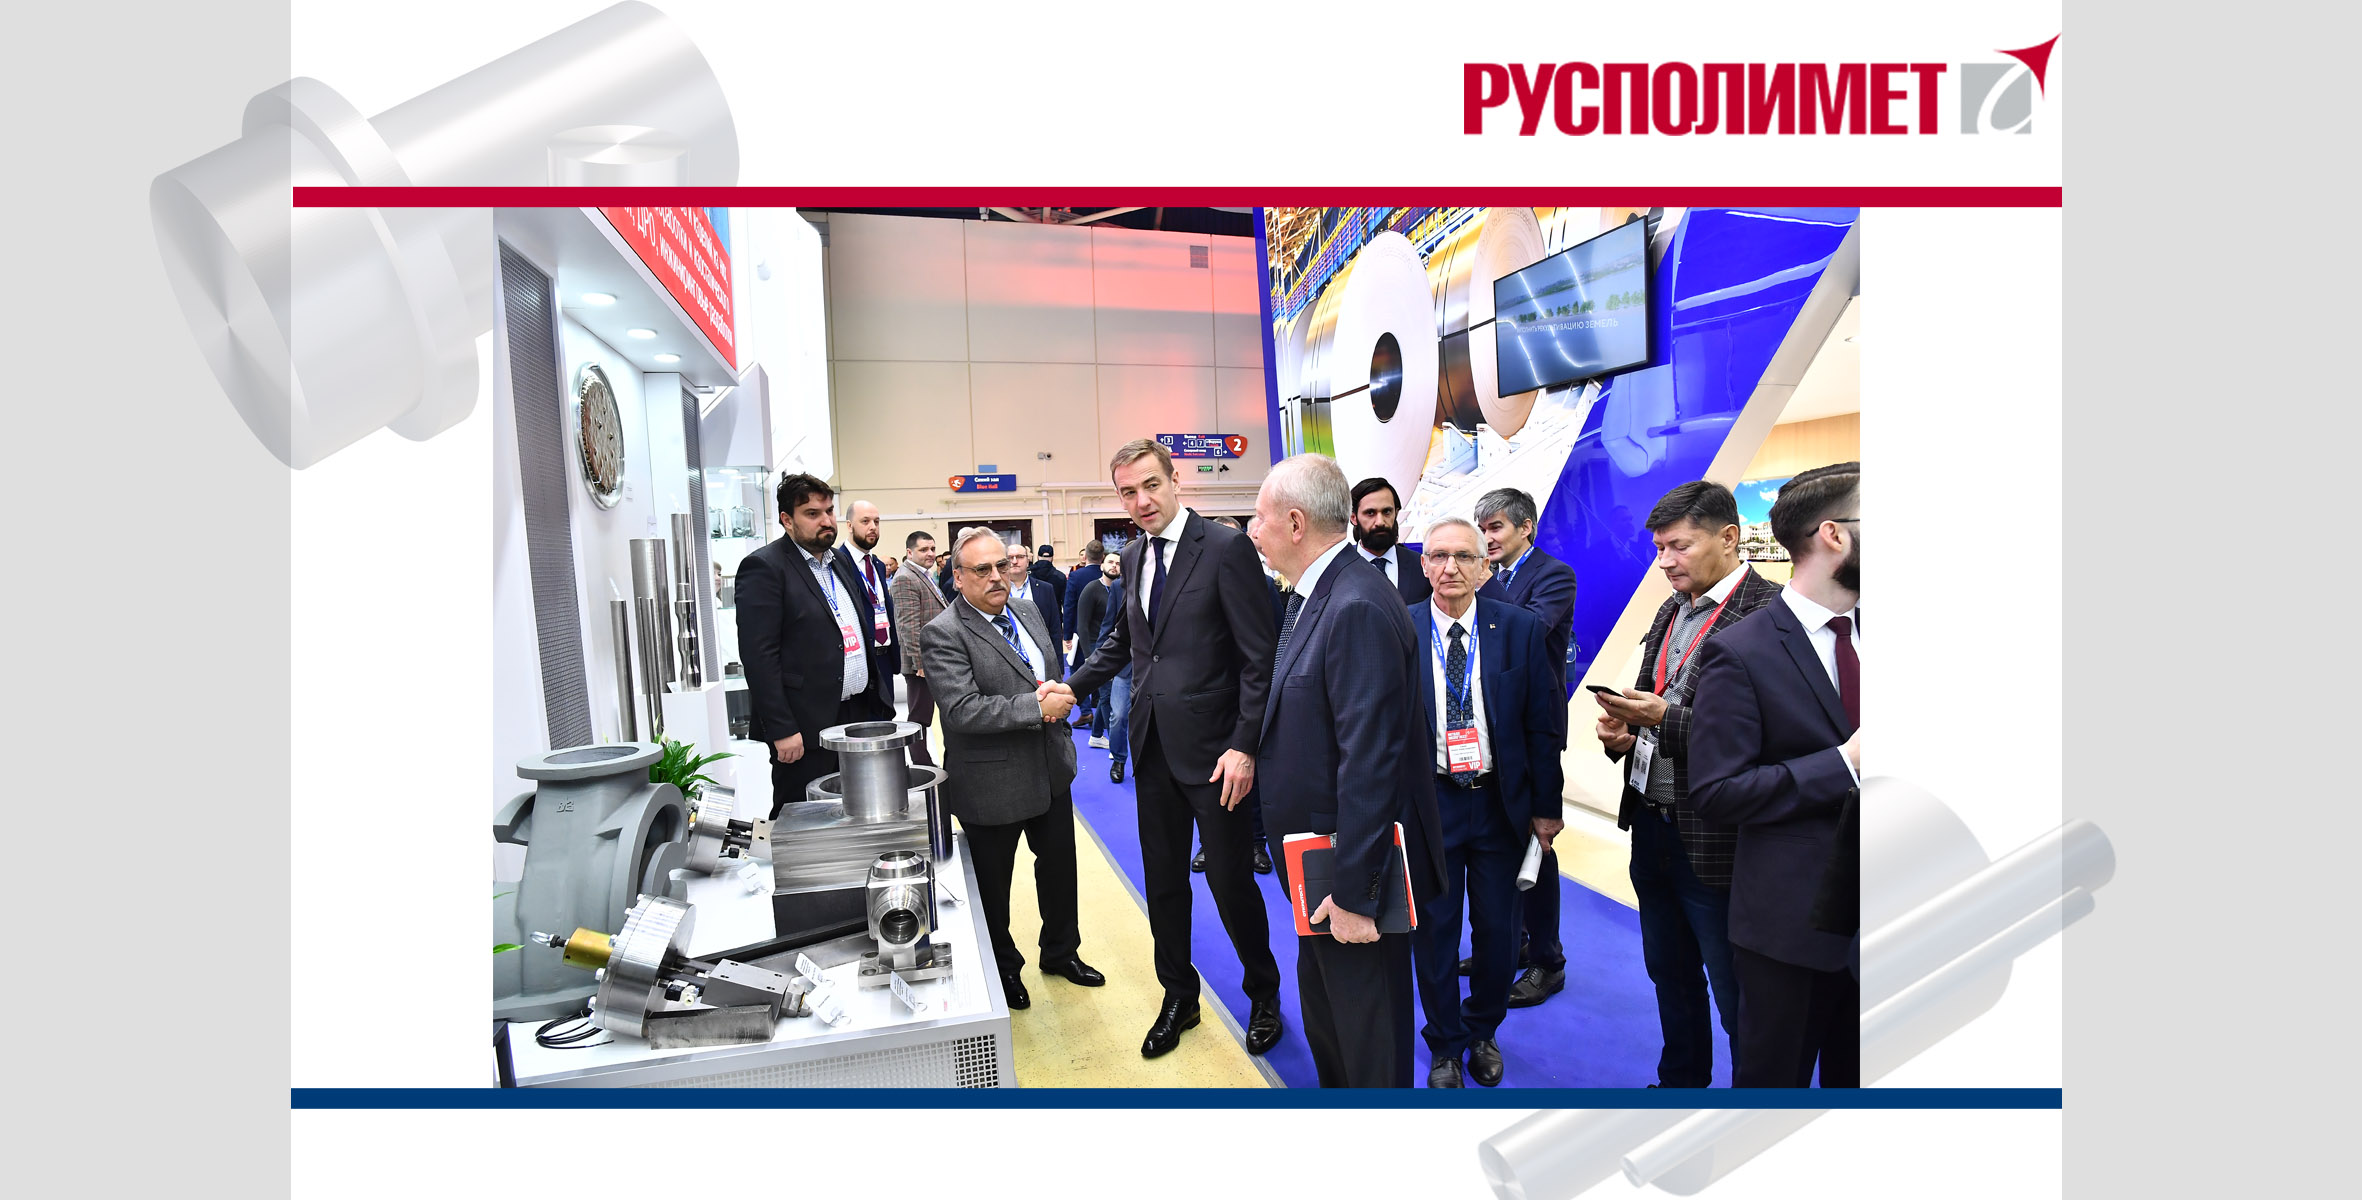 RUSPOLIMET GROUP OF COMPANIES PRESENTED NEW DEVELOPMENTS AT "METAL EXPO"